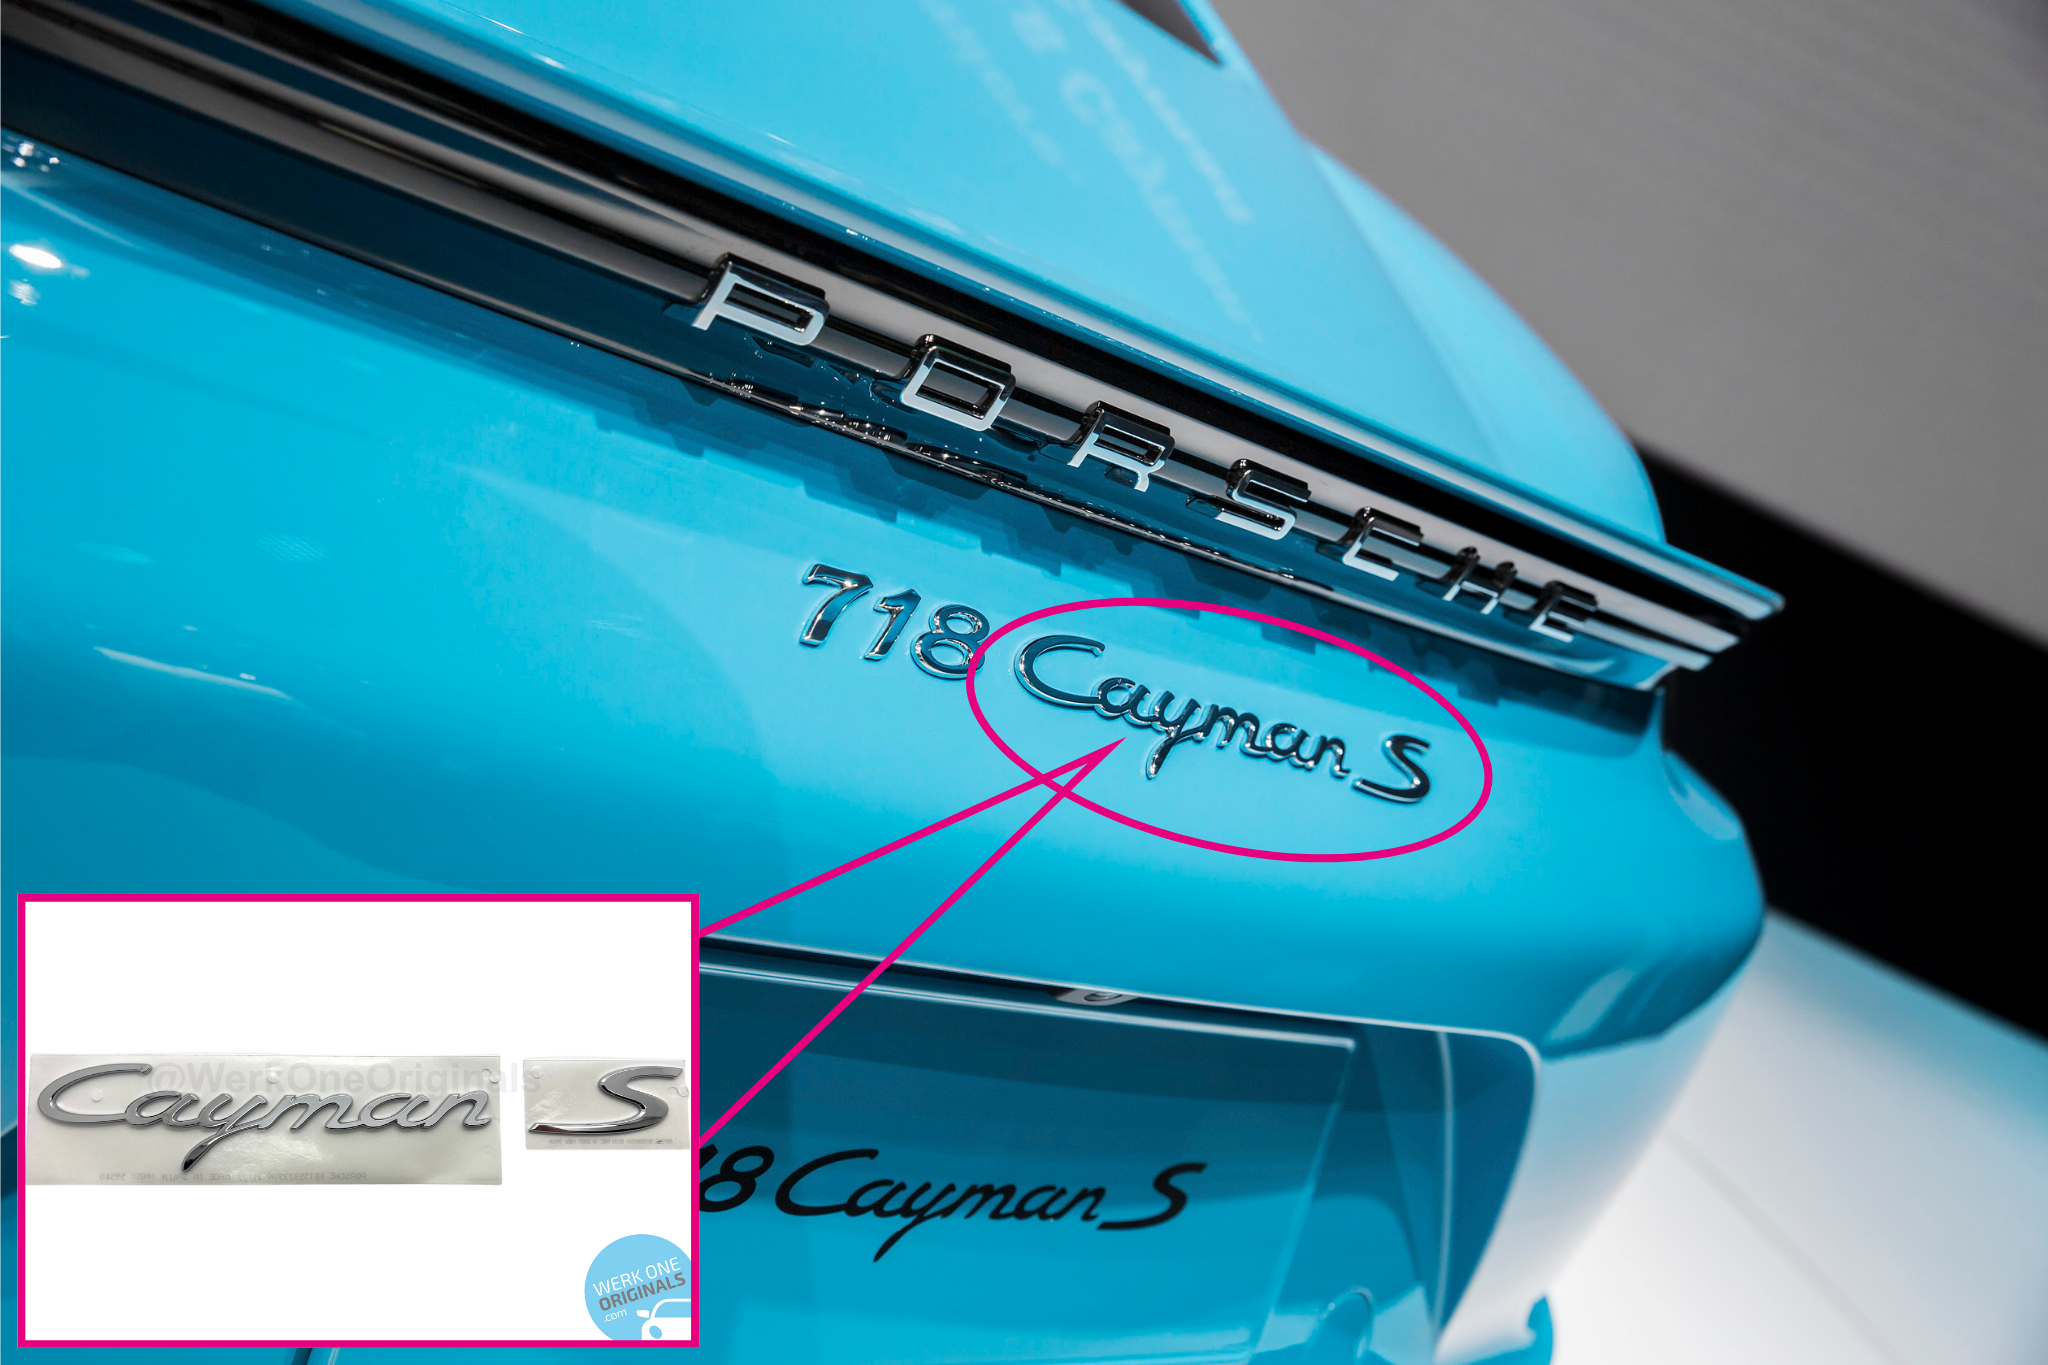 Porsche Official 'Cayman S' Rear Badge Decal in Chrome Silver for Cayman S Type 718 Models